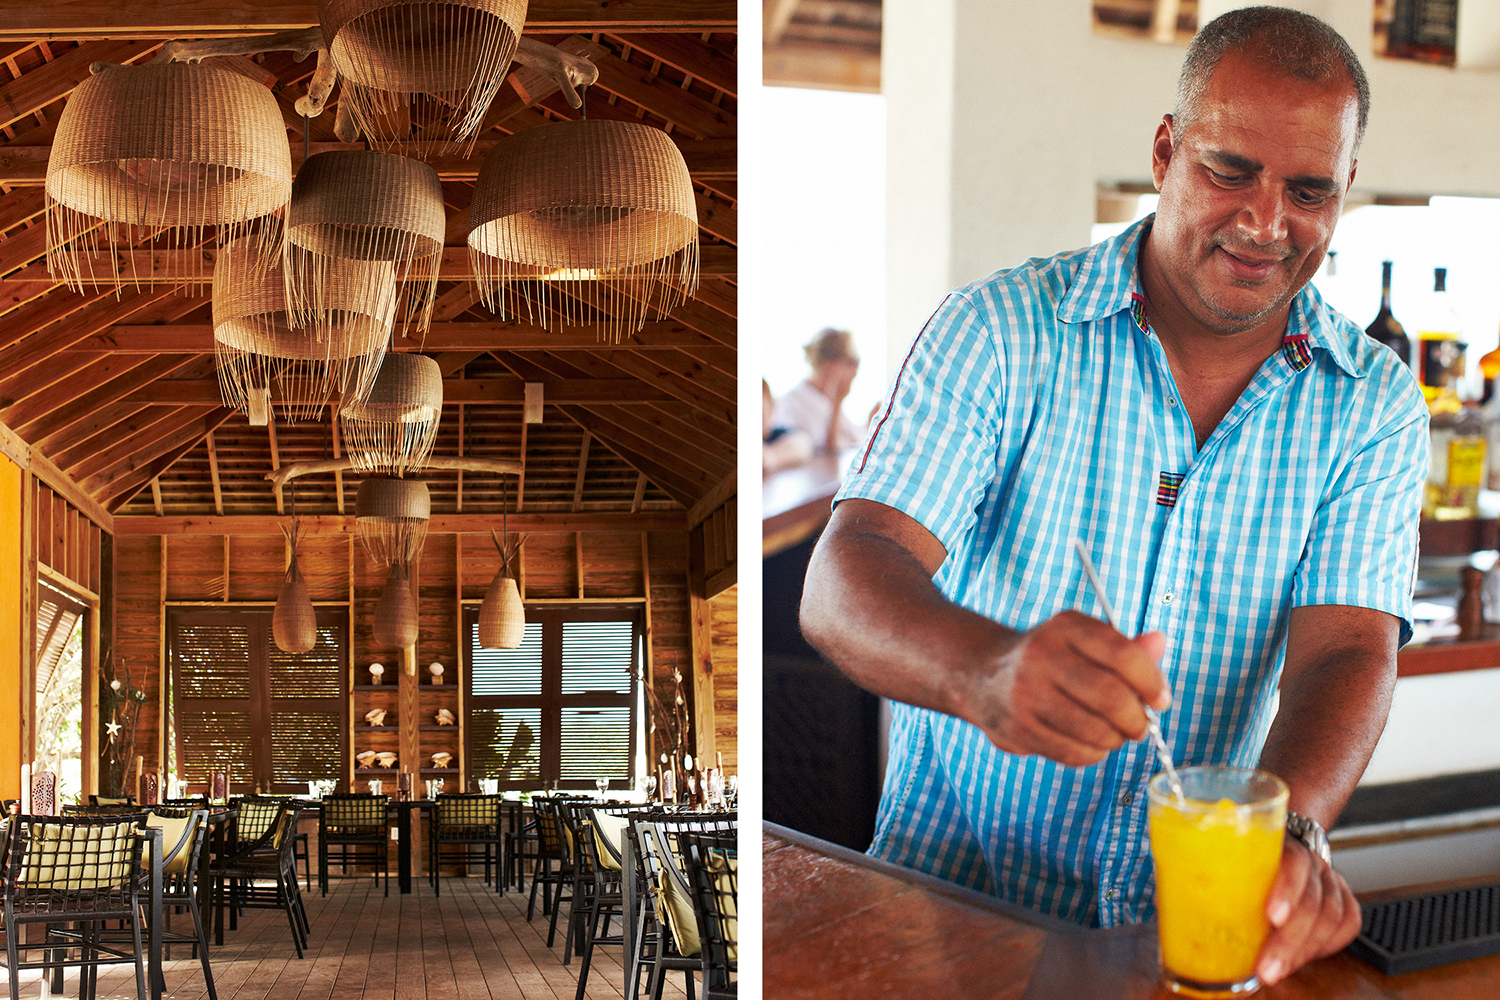  SPICE MILL RESTAURANT + OWNER ROGER BRISBANE STIRRING A TING-AND-PASSION-FRUIT PUNCH 